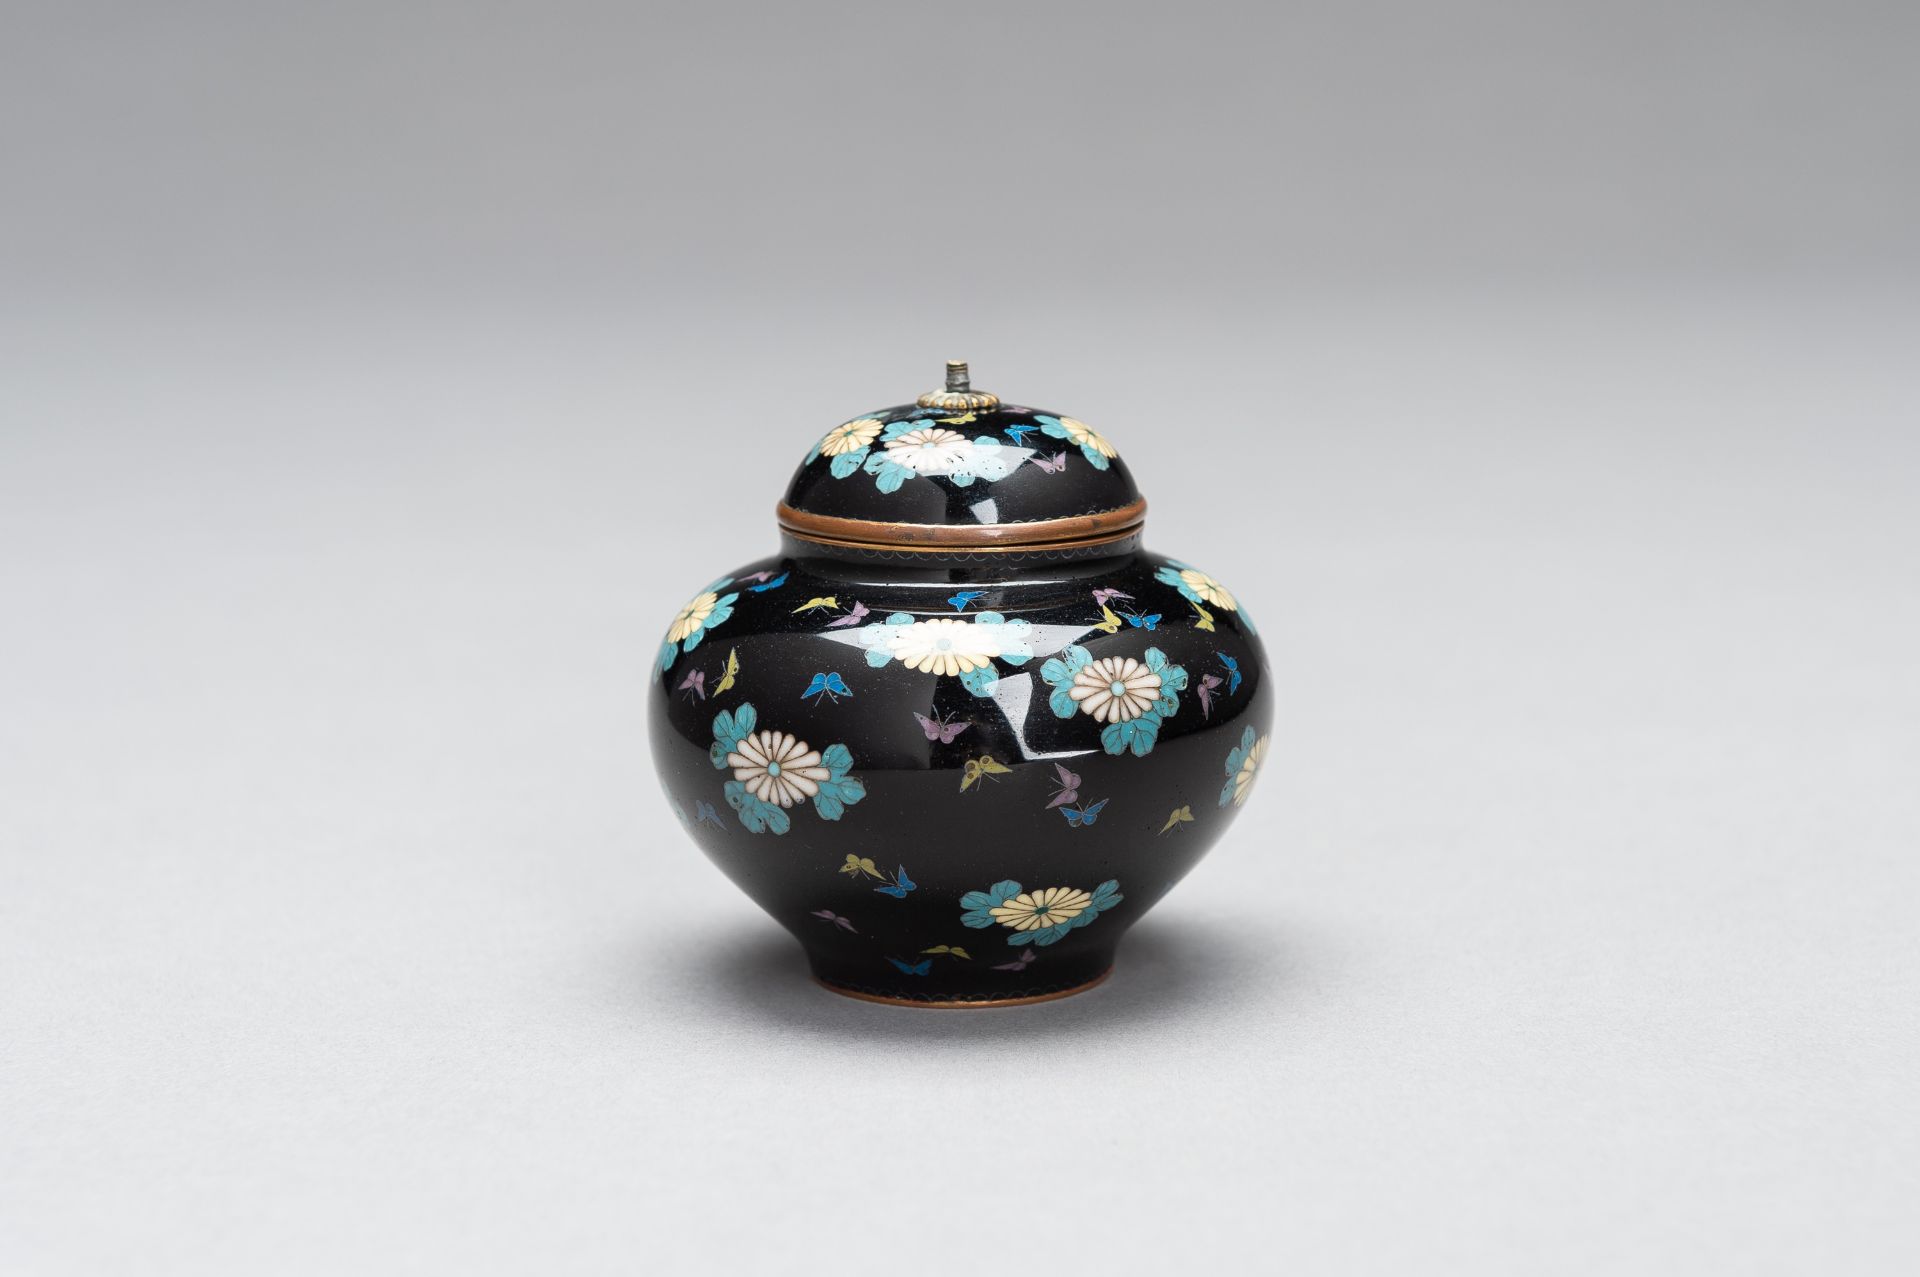 A CLOISONNE ENAMEL MINIATURE VASE WITH COVER - Image 2 of 9